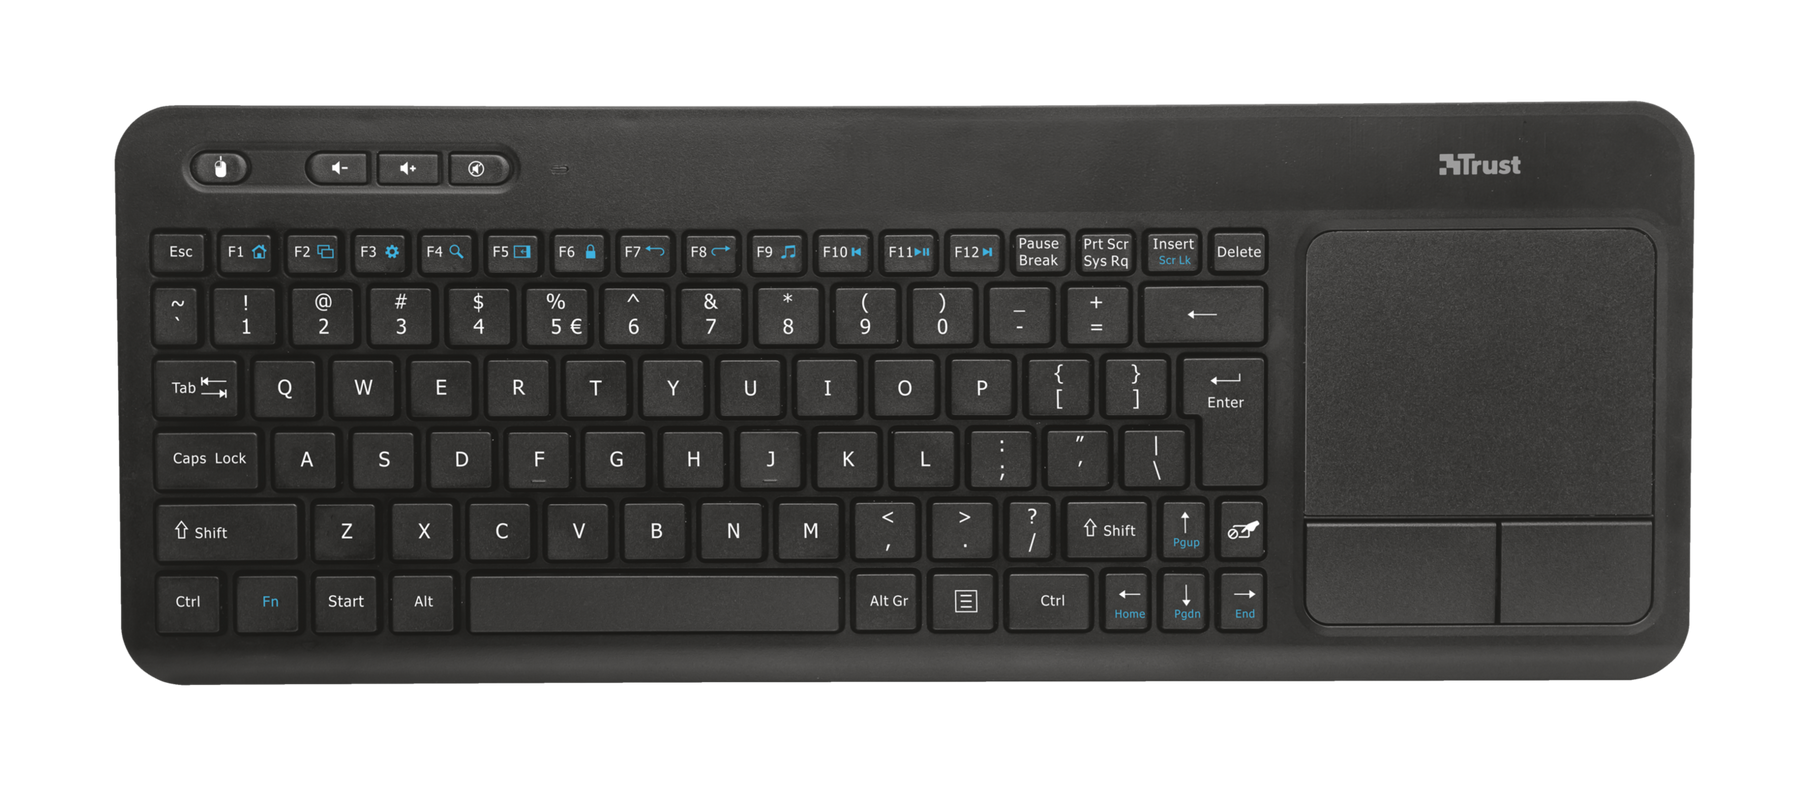 Veza Wireless Keyboard with touchpad-Top